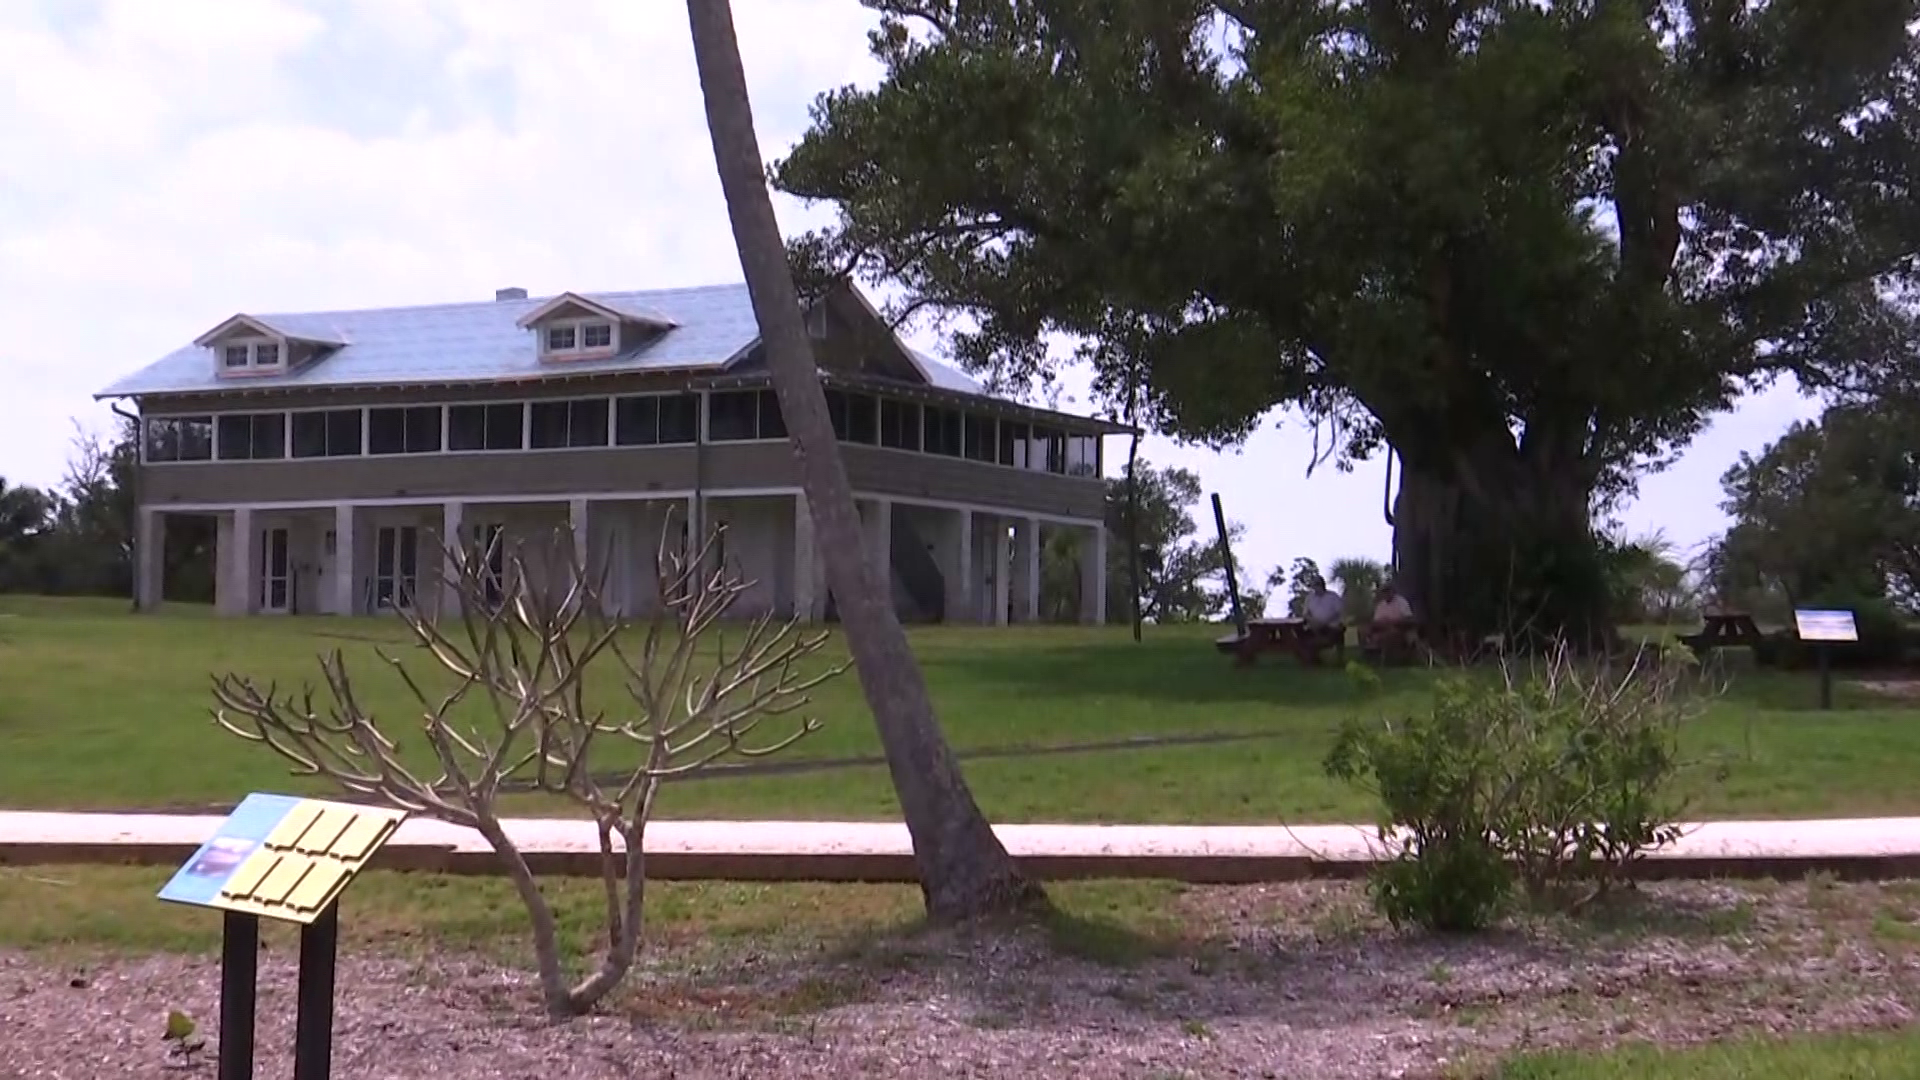 The Mound House, damaged by Ian, is back in business [Video]